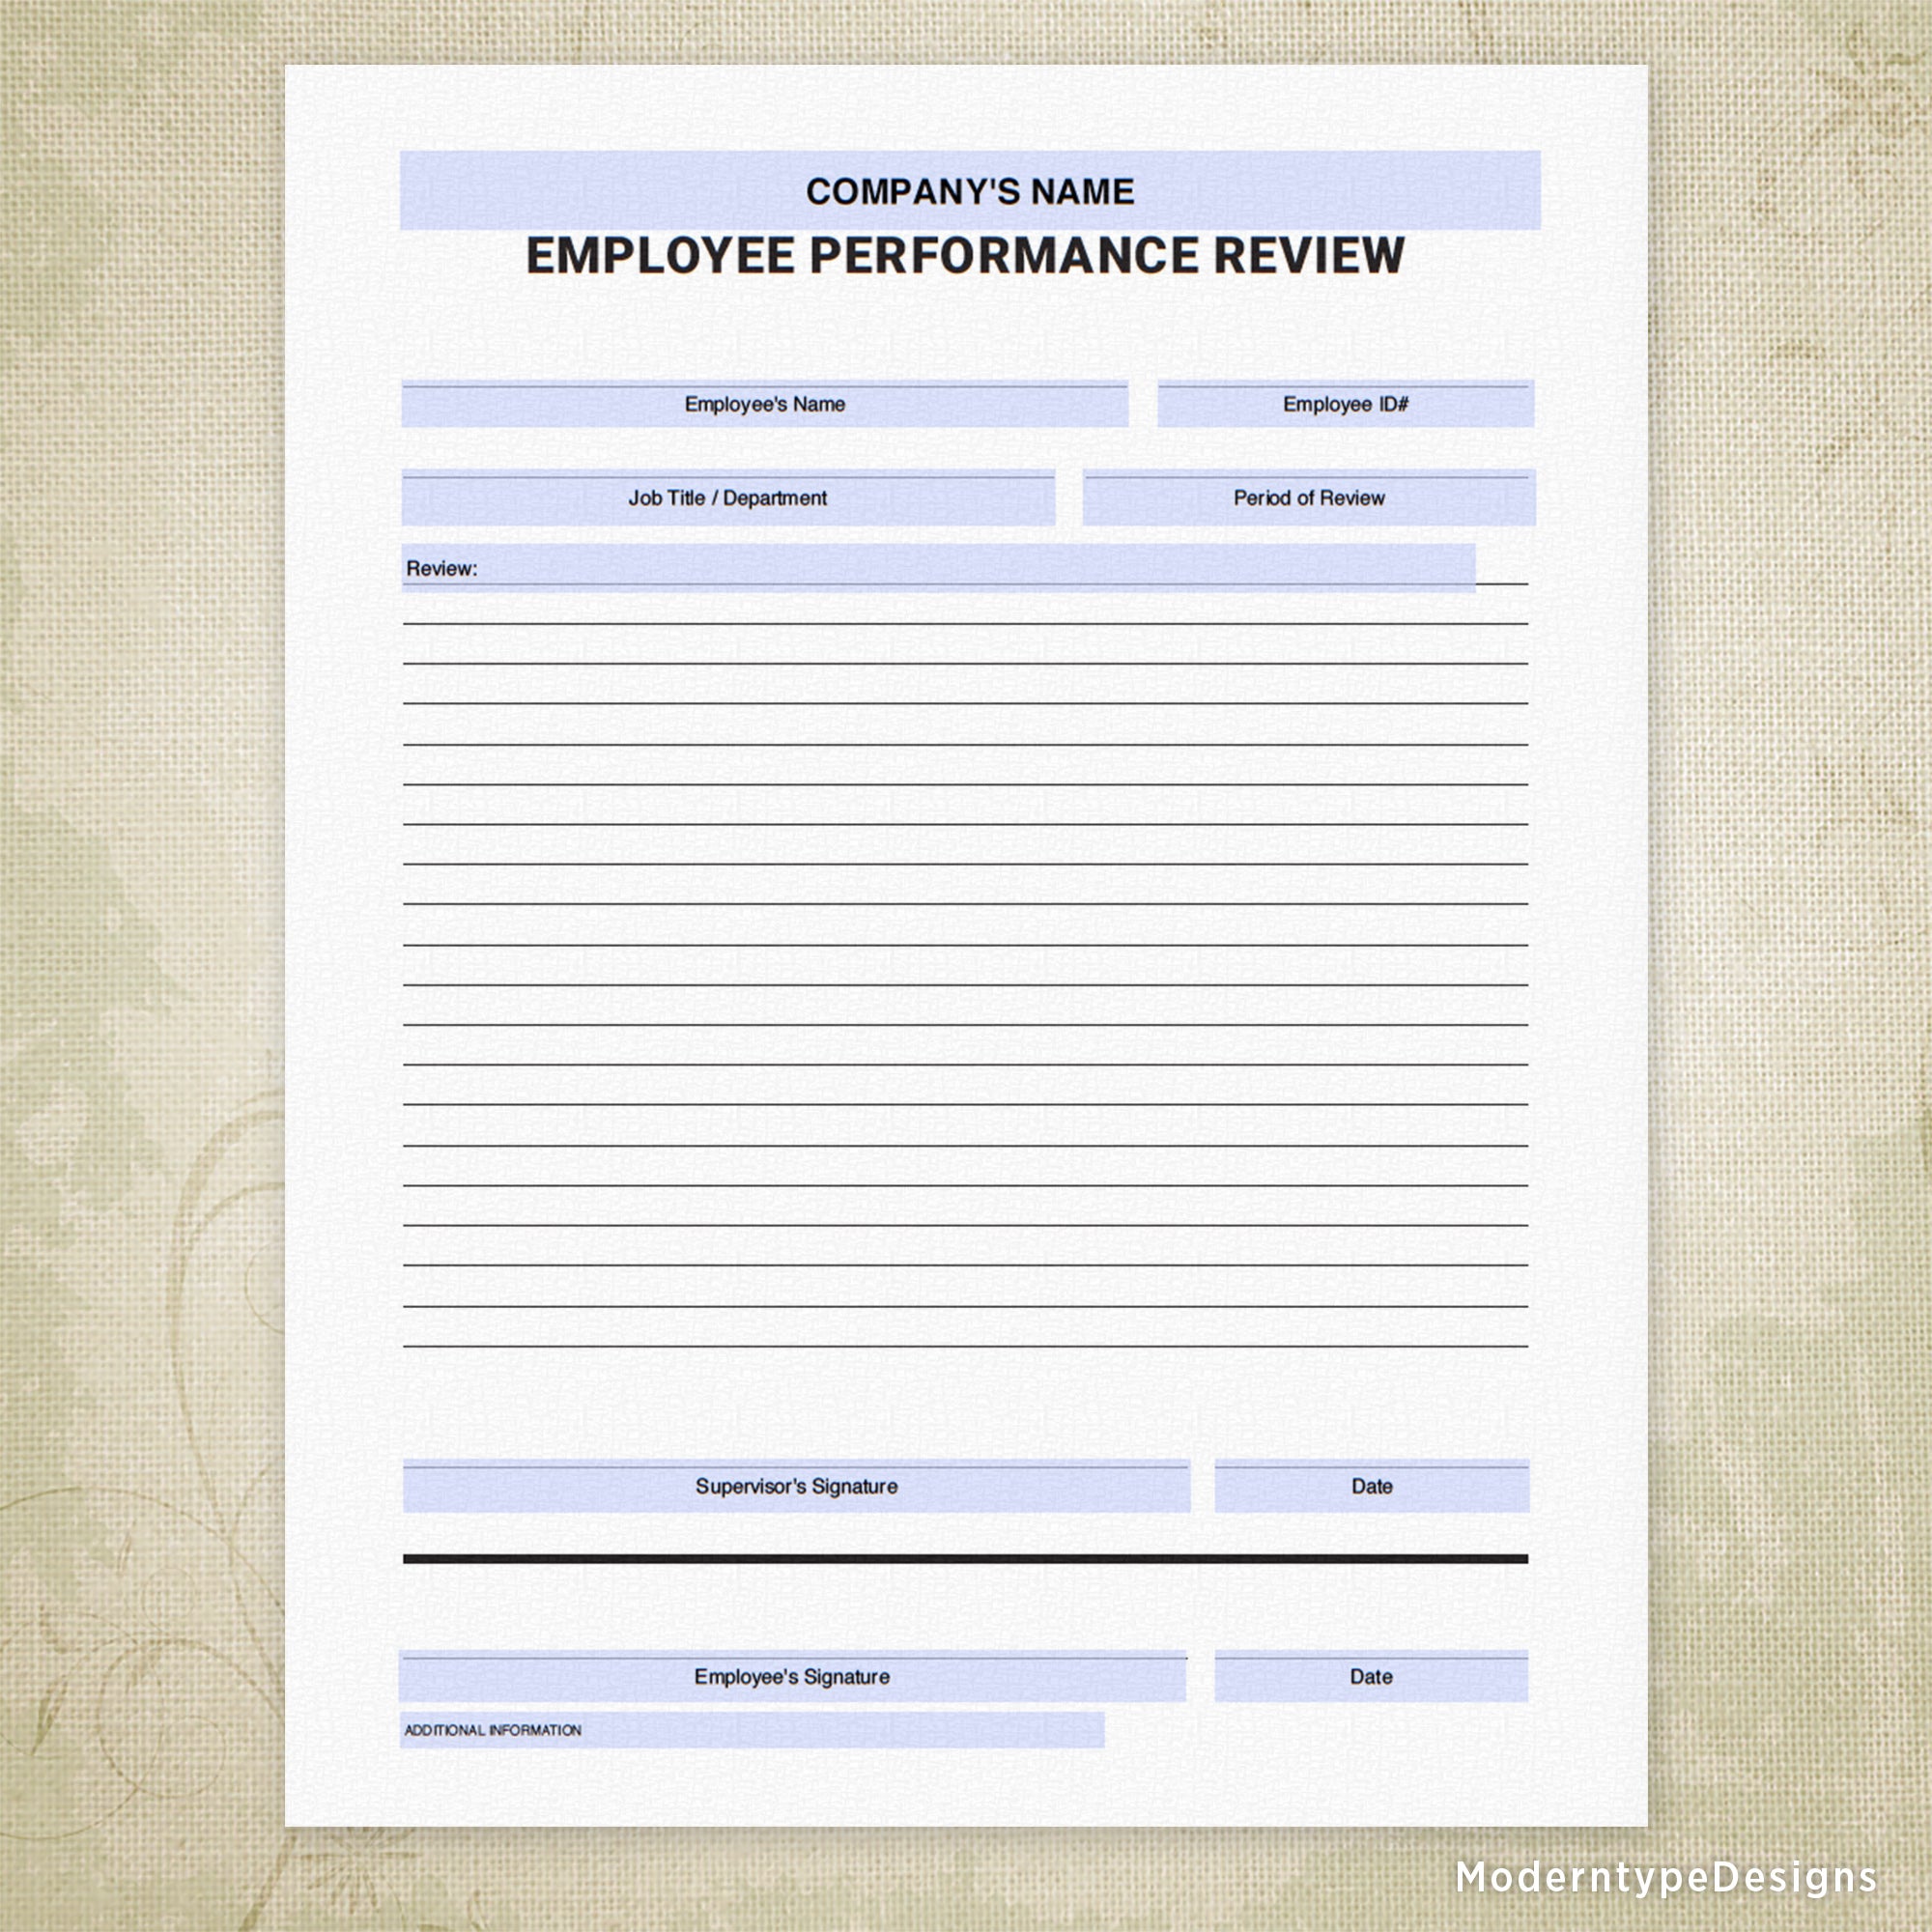 Employee Performance Review Printable, Personalized